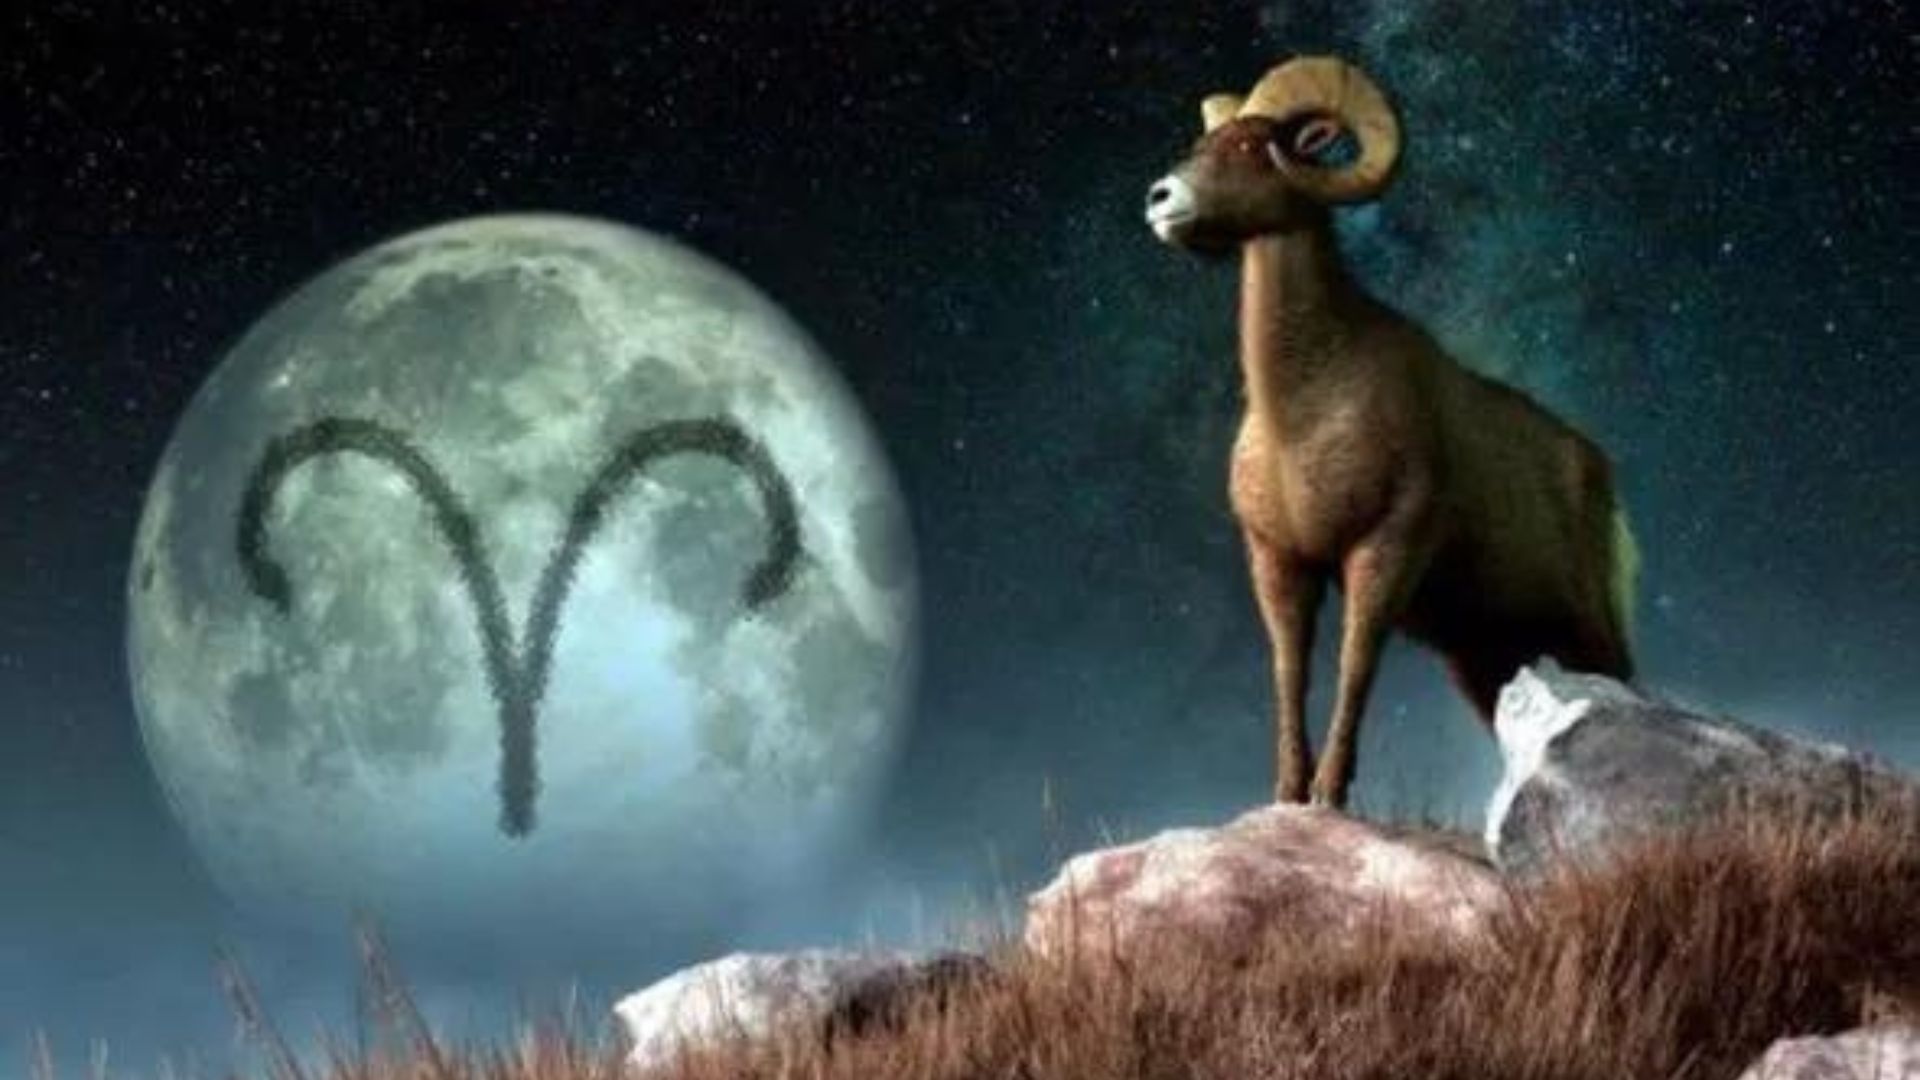 Zodiac Sign On Moon And Animal On A Rock